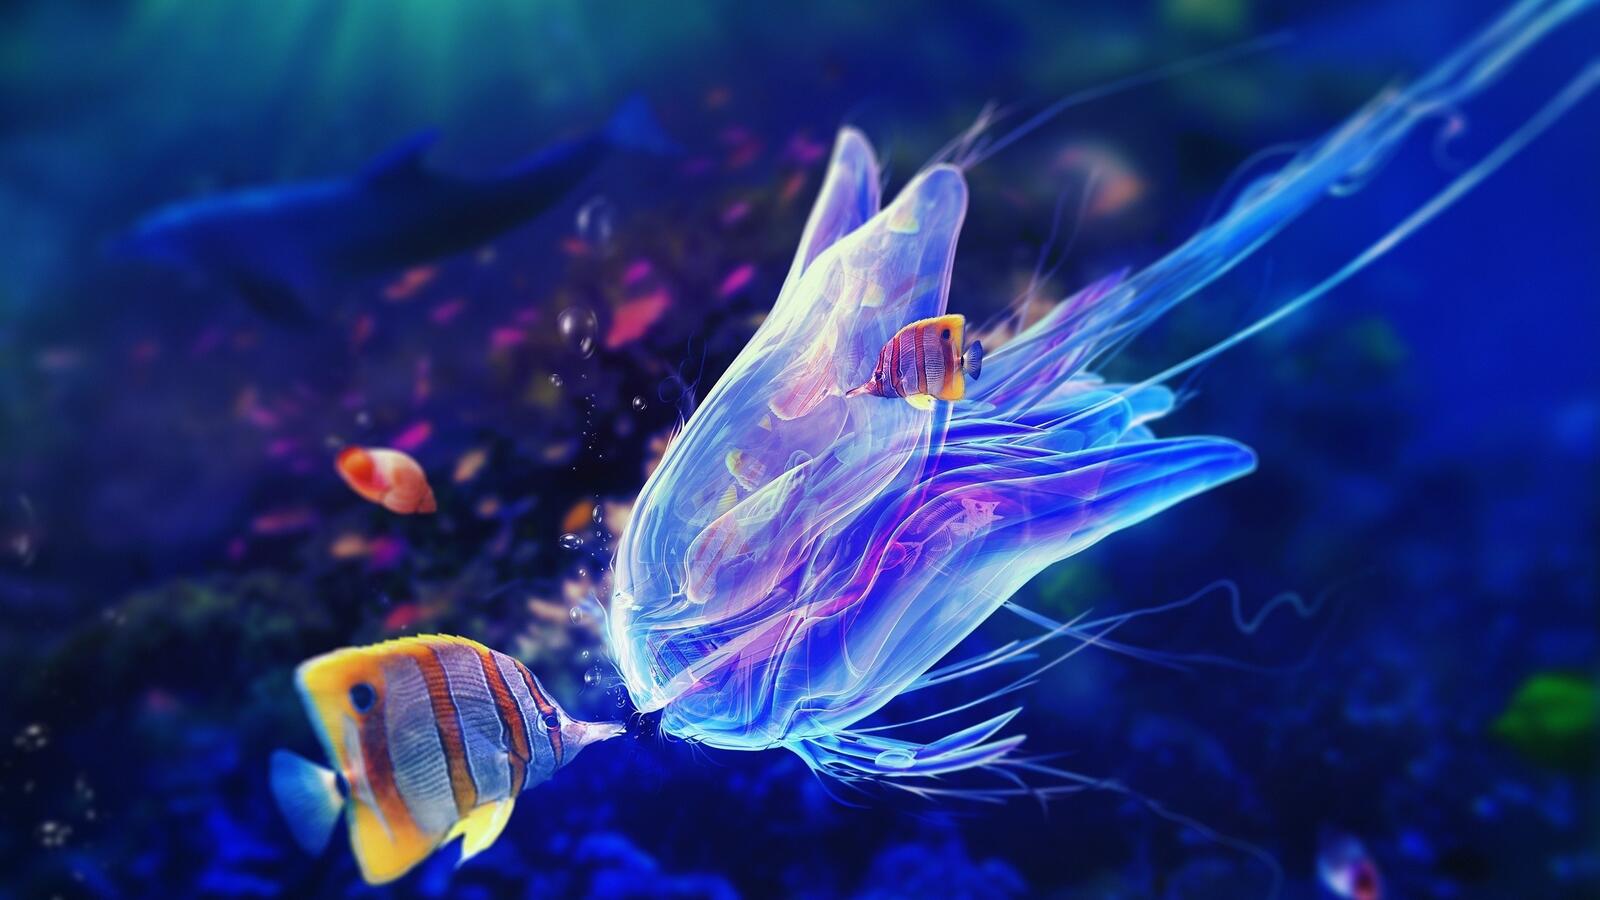 Wallpapers jellyfish fish dolphin on the desktop